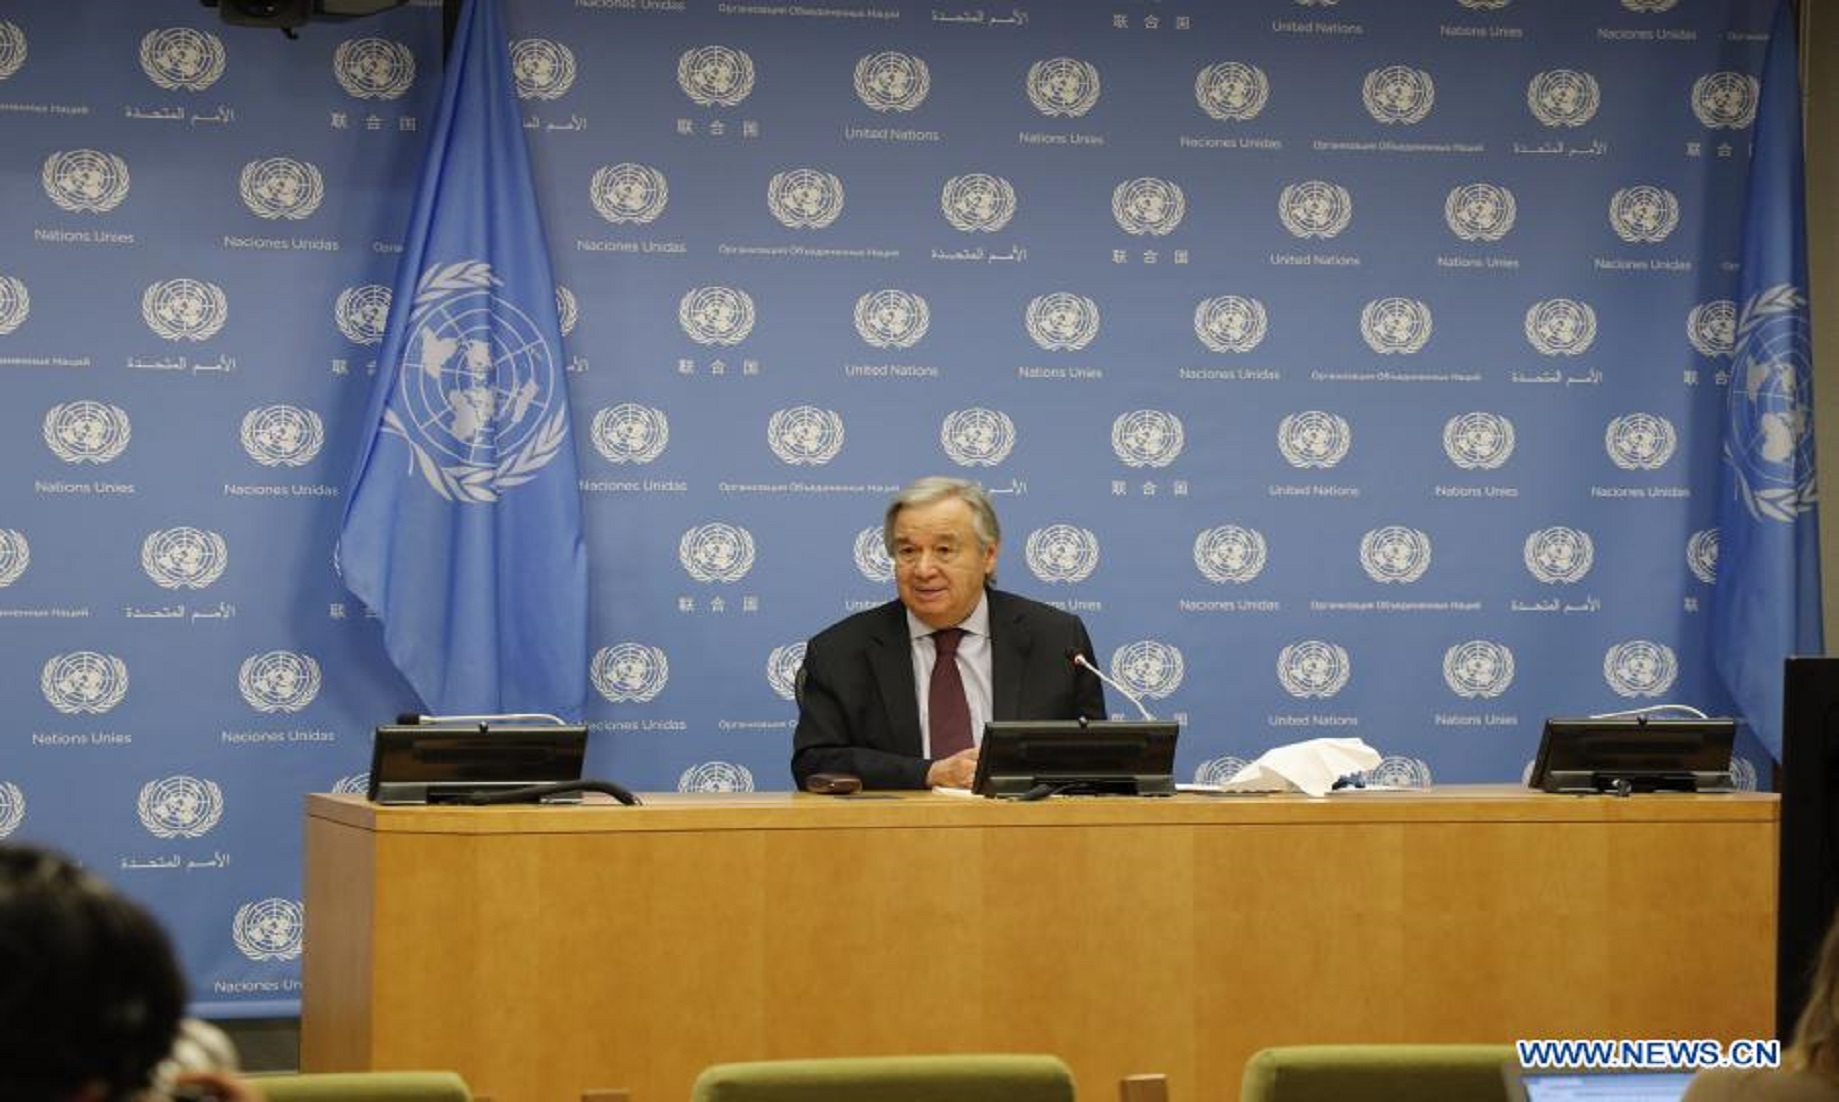 UN Chief Urges G20 Leaders To Act, Cooperate Before They Meet Online